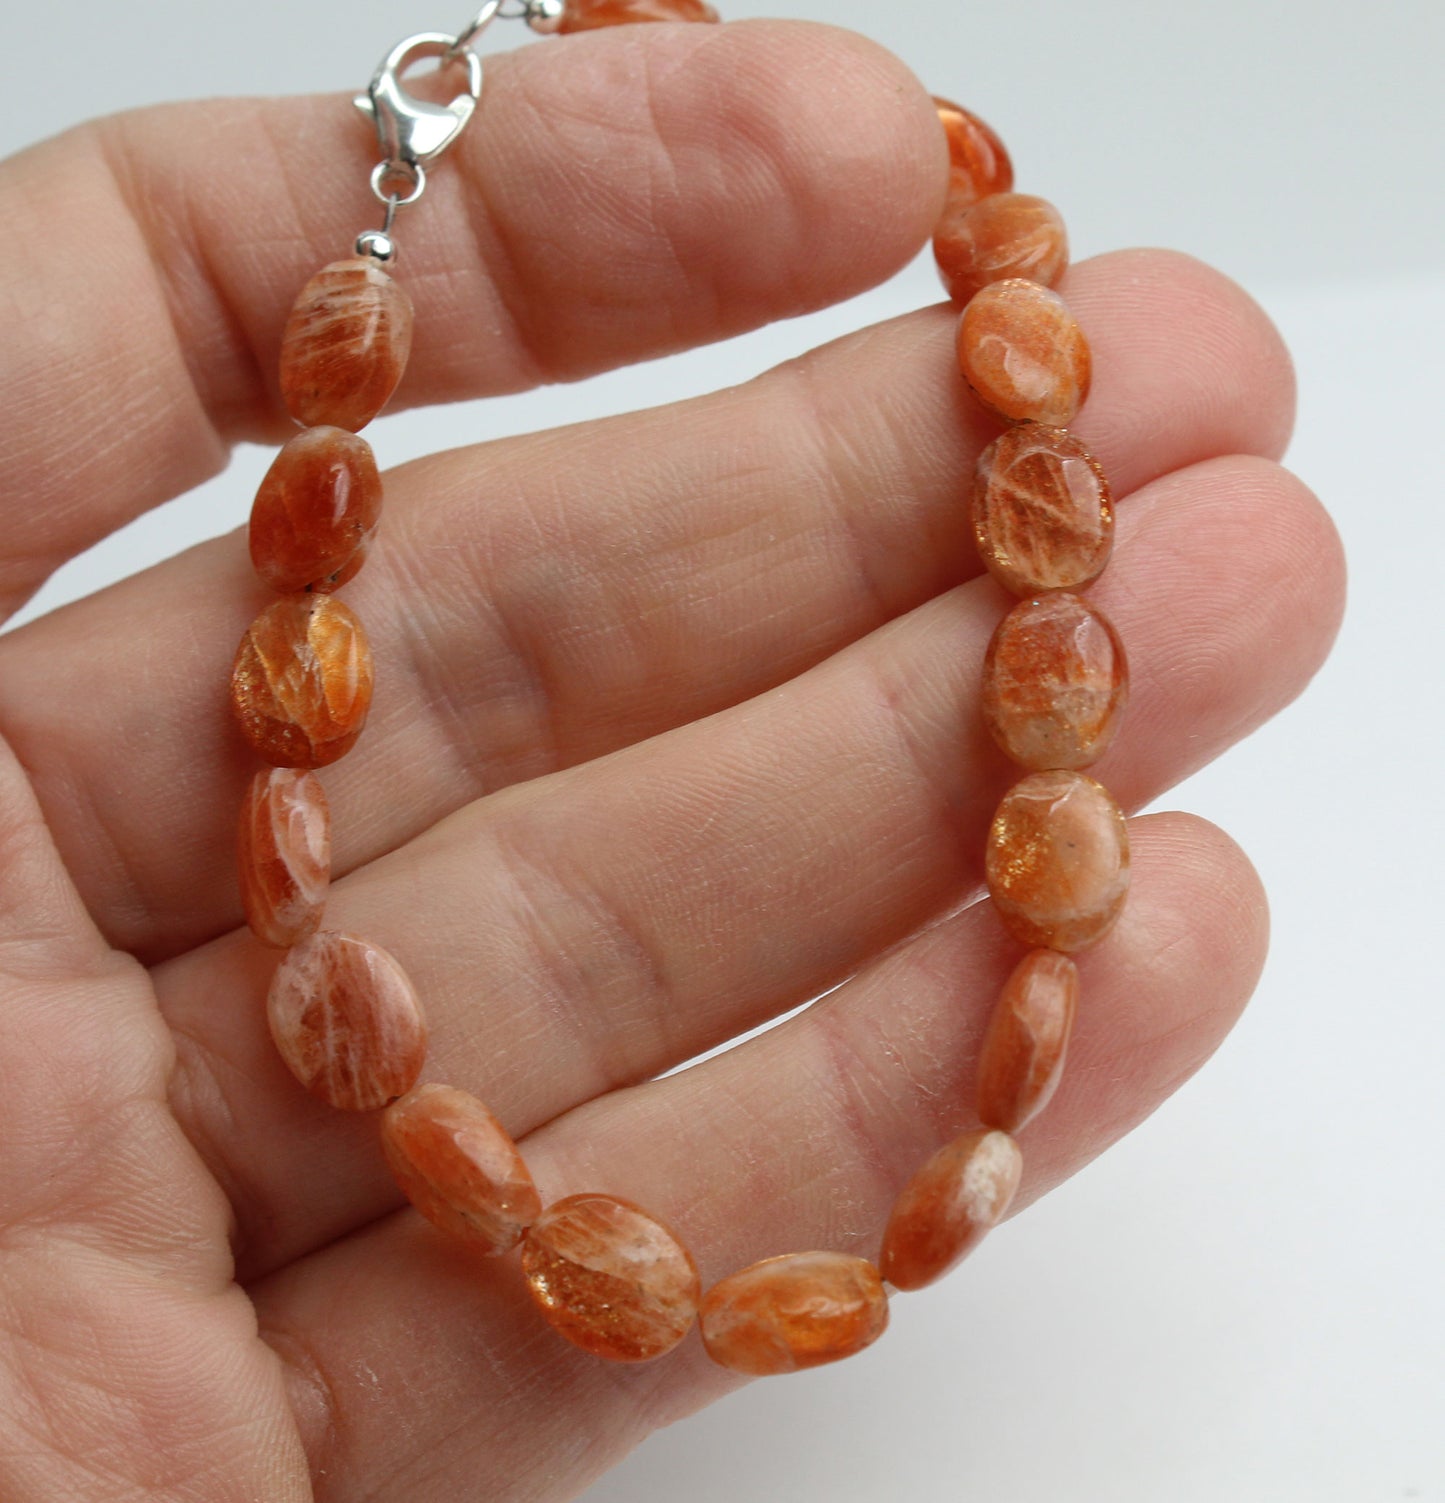 Buy Reiki Crystal Products AAA Sunstone Bracelet, Round Bead 6 mm Bracelet  for Reiki Healing and Crystal Healing Stones Online at Best Prices in India  - JioMart.